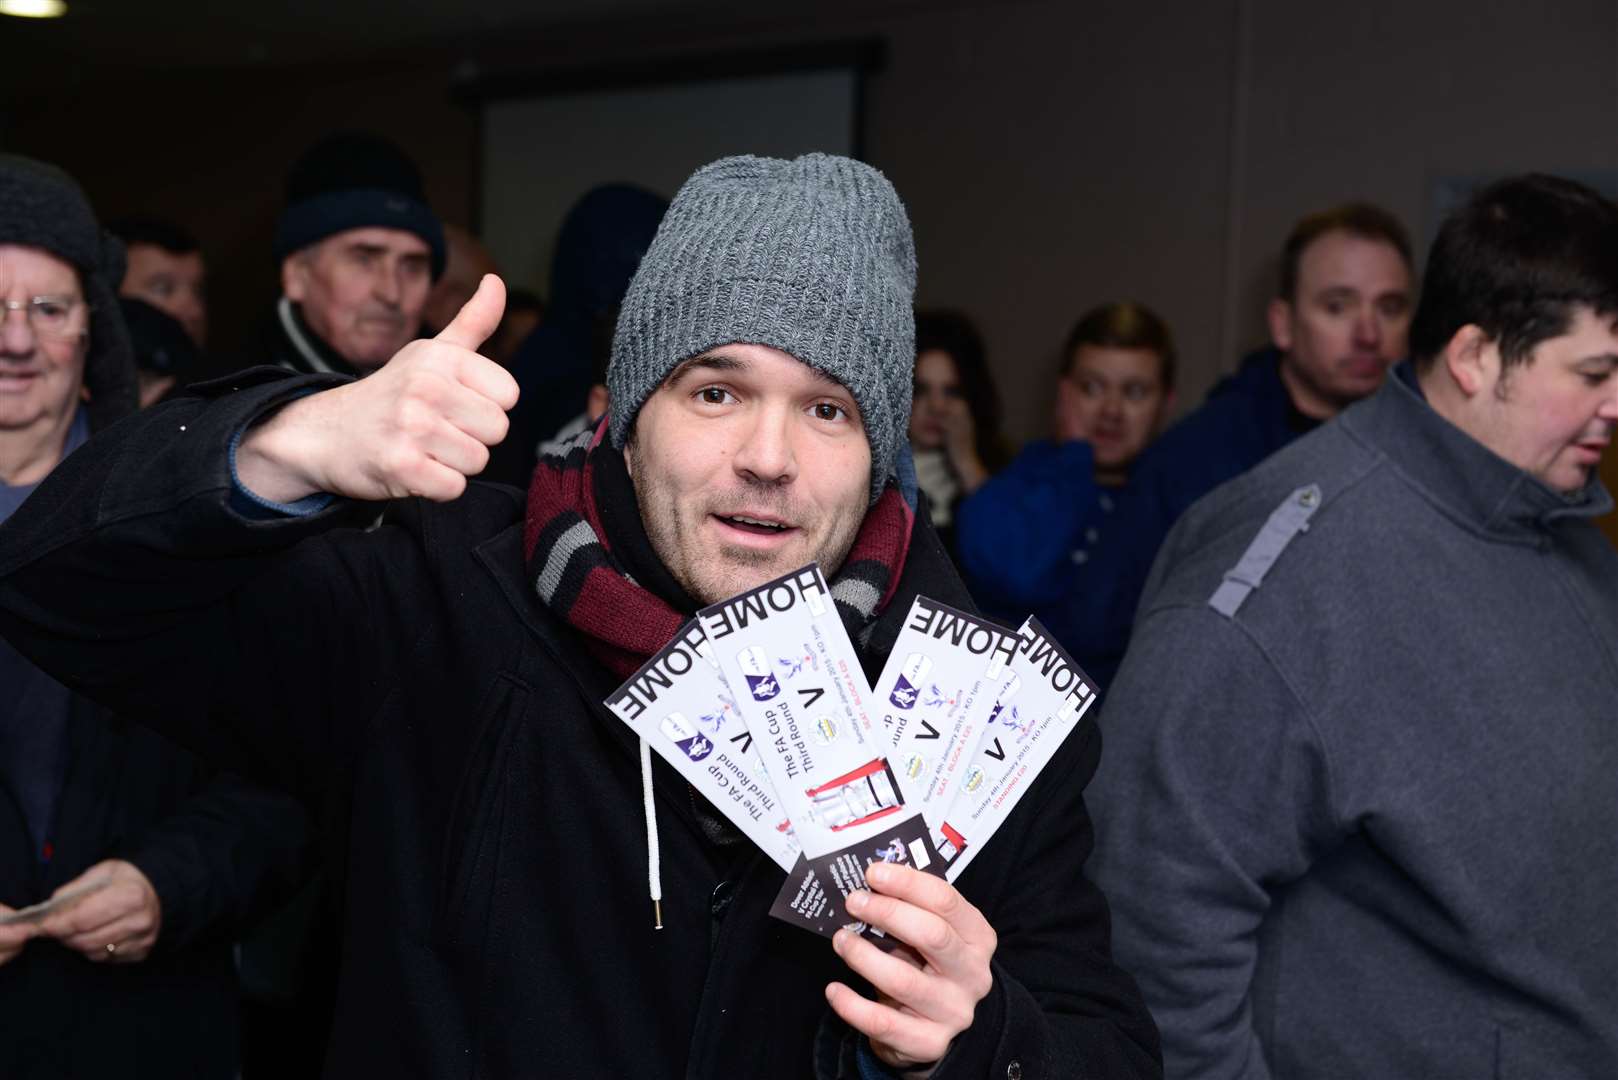 One happy fan with his tickets